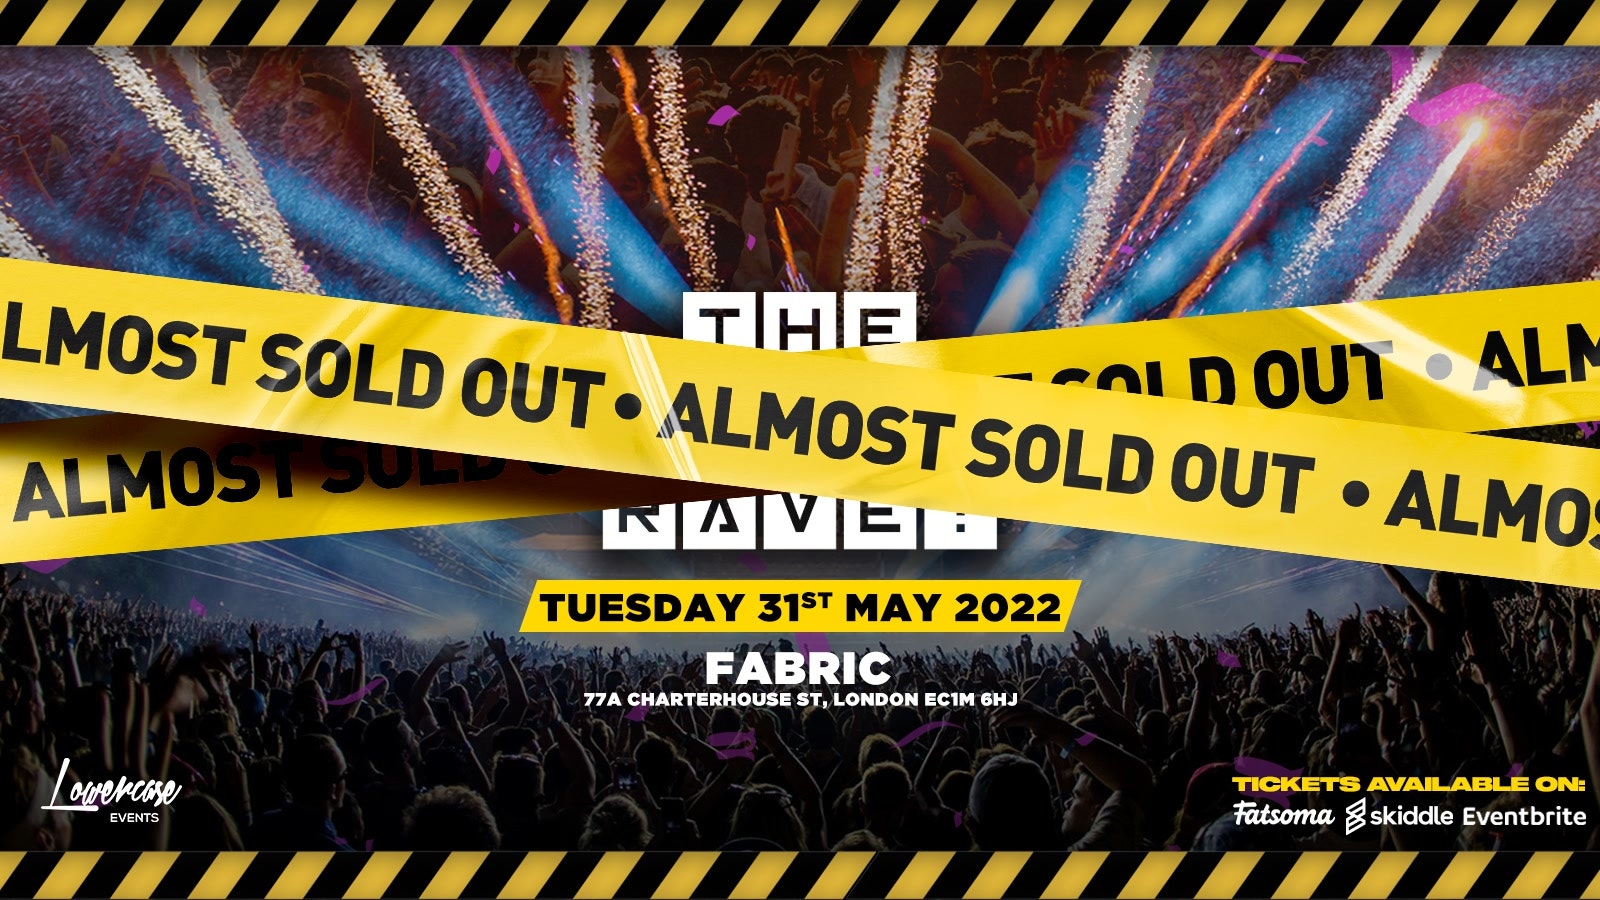 The End of Exams Rave @ FABRIC – ⚠️LAST 5 TICKETS ⚠️